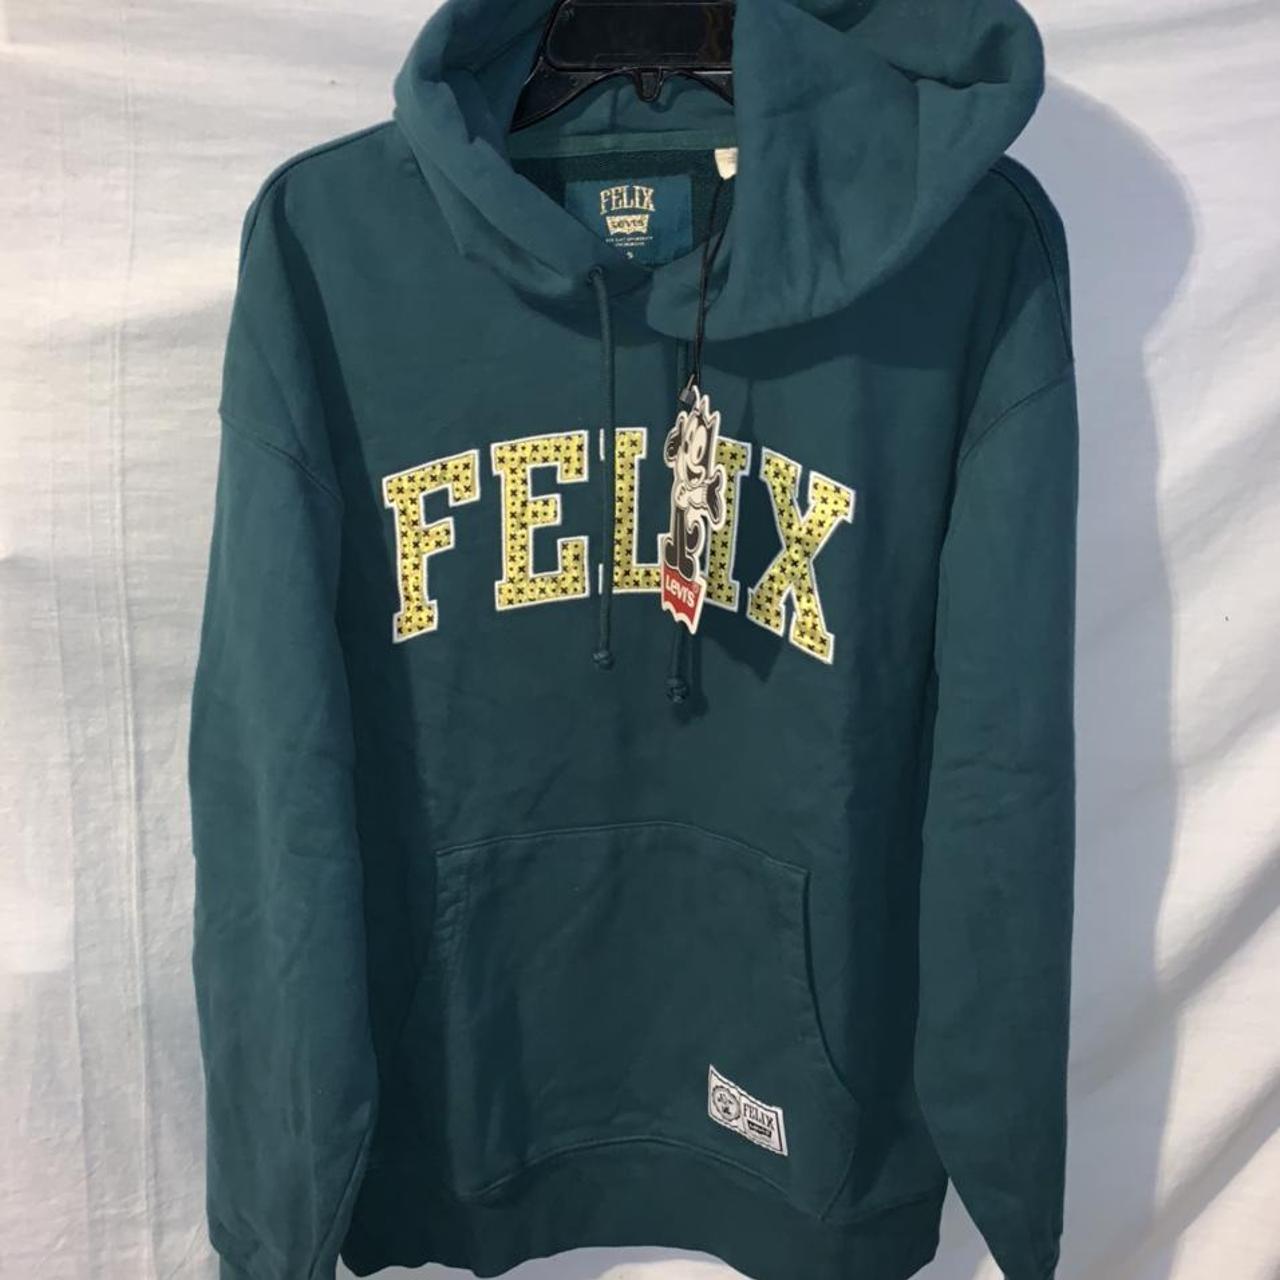 Levi's x Felix The Cat, Hoodie, Size: Small, Color: